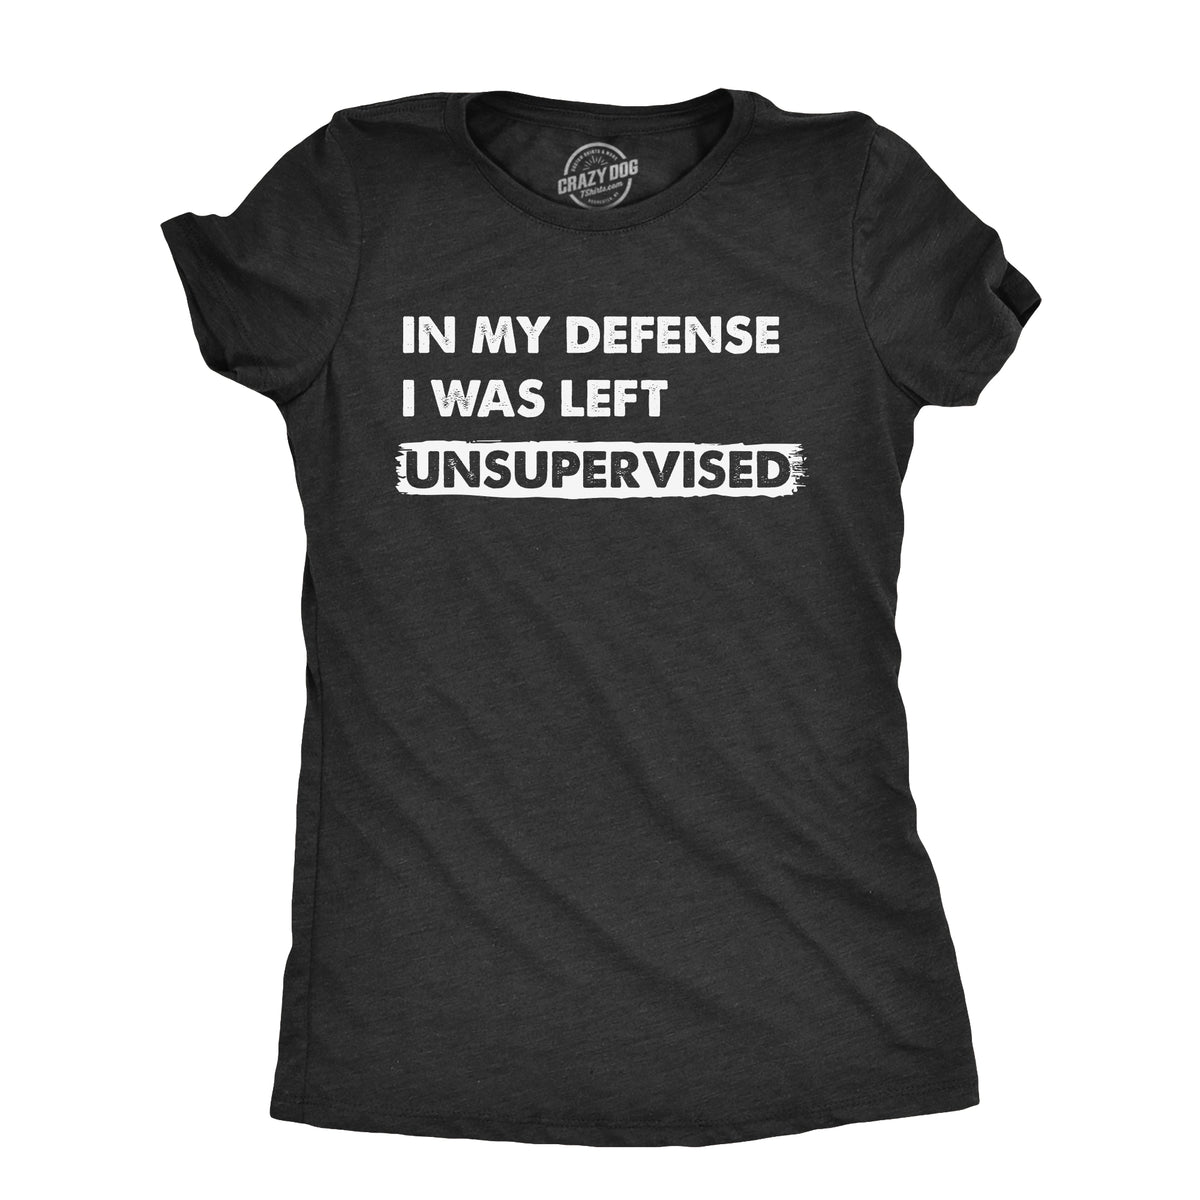 Funny Heather Black - MYDEFENSE In My Defense I Was Left Unsupervised Womens T Shirt Nerdy Sarcastic Tee